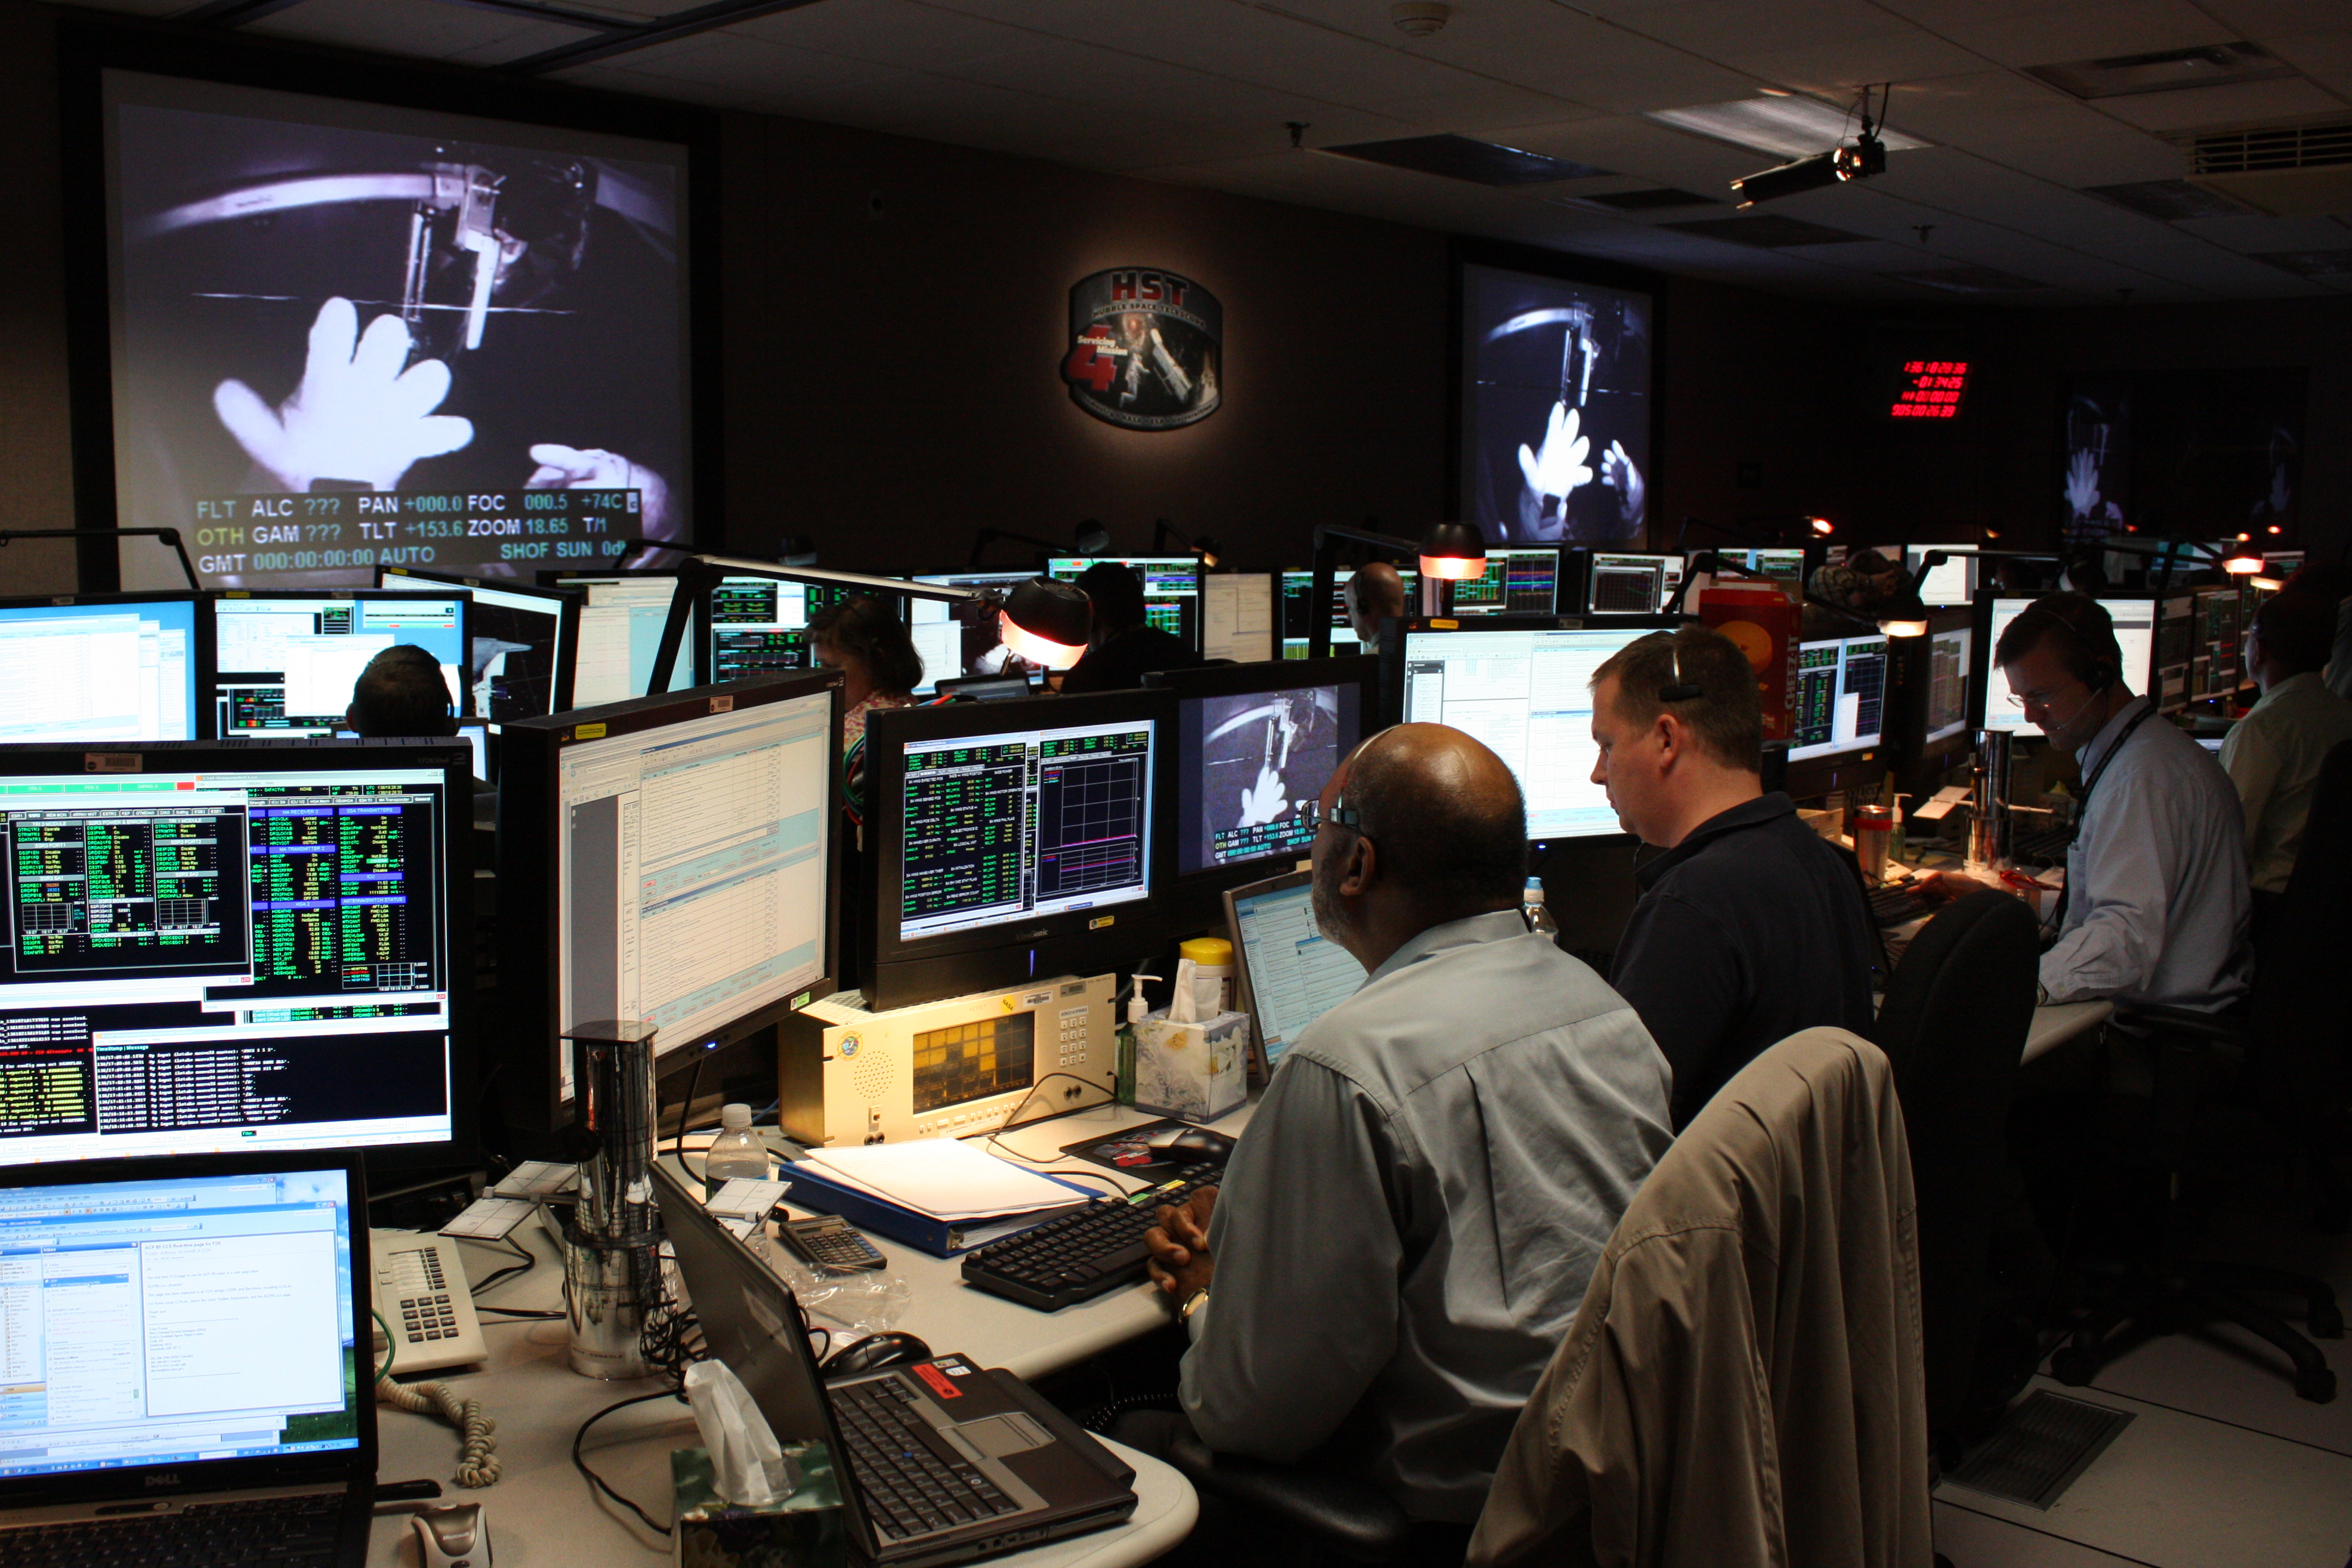 People in the Hubble control center watch the third spacewalk of SM4 on large screen projectors.